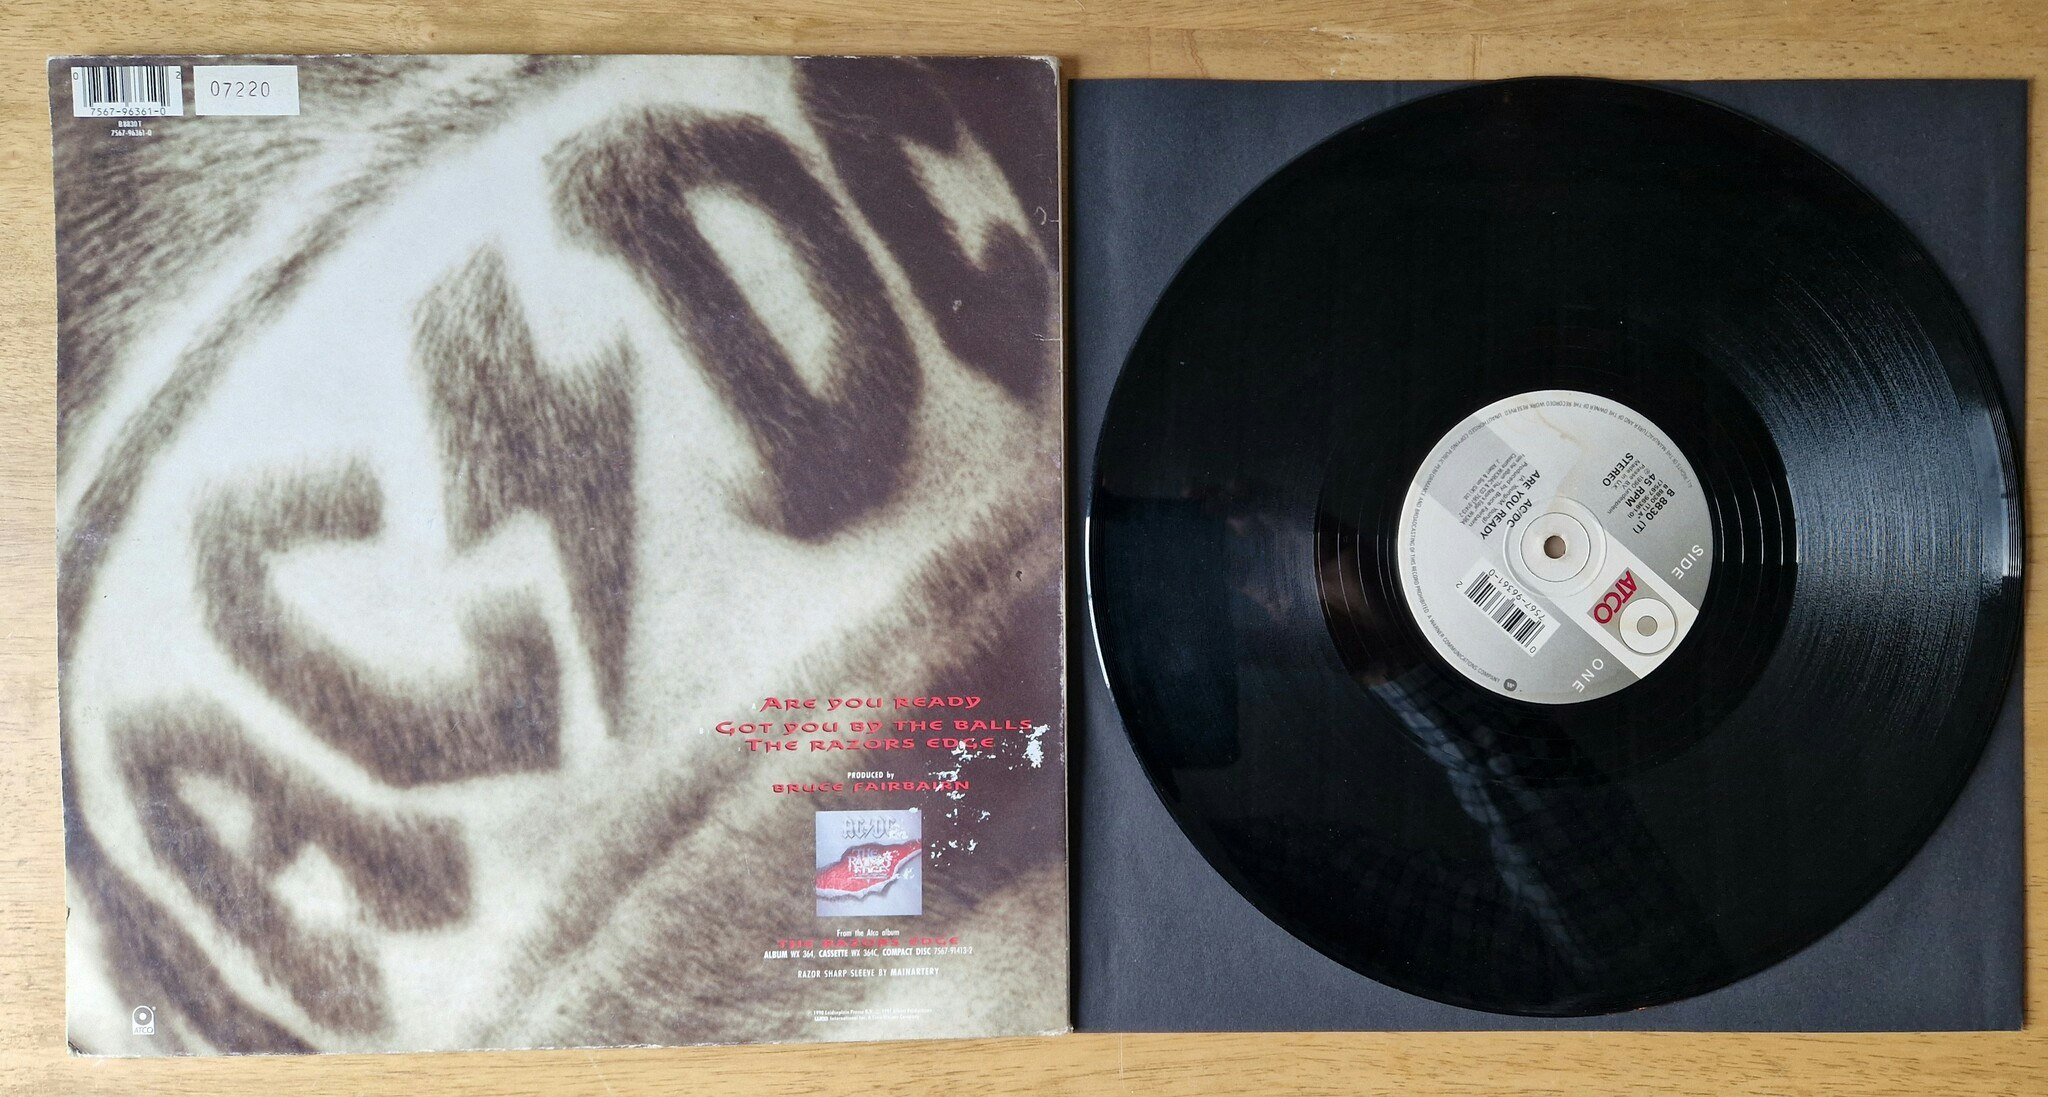 AC/DC, Are you ready. Vinyl S 12"